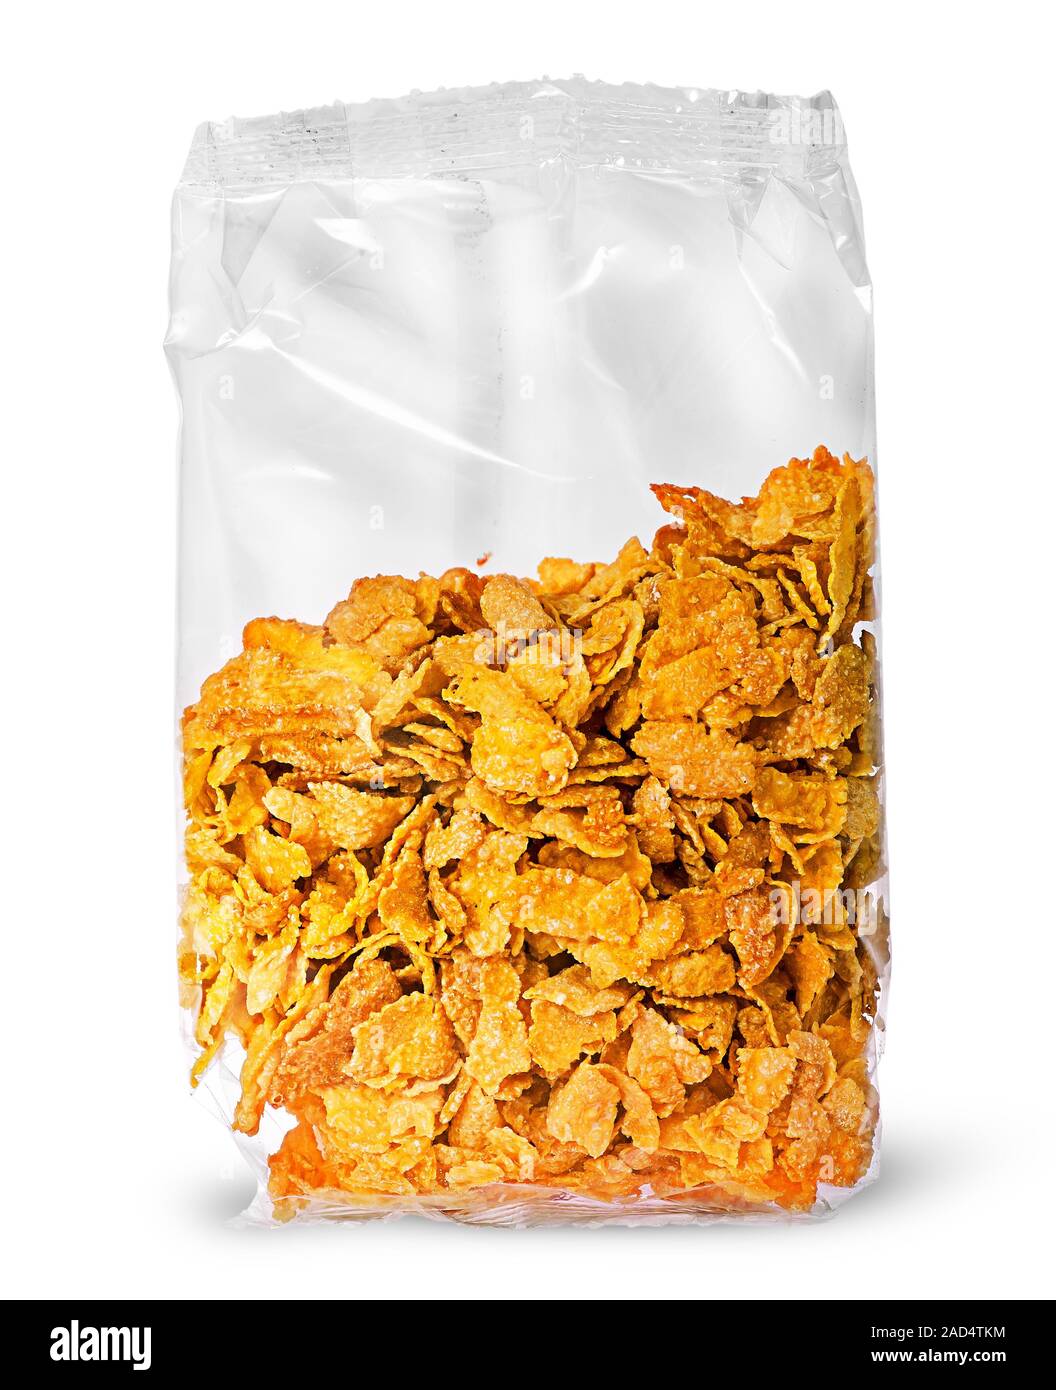 Sealed package of cornflakes vertically Stock Photo